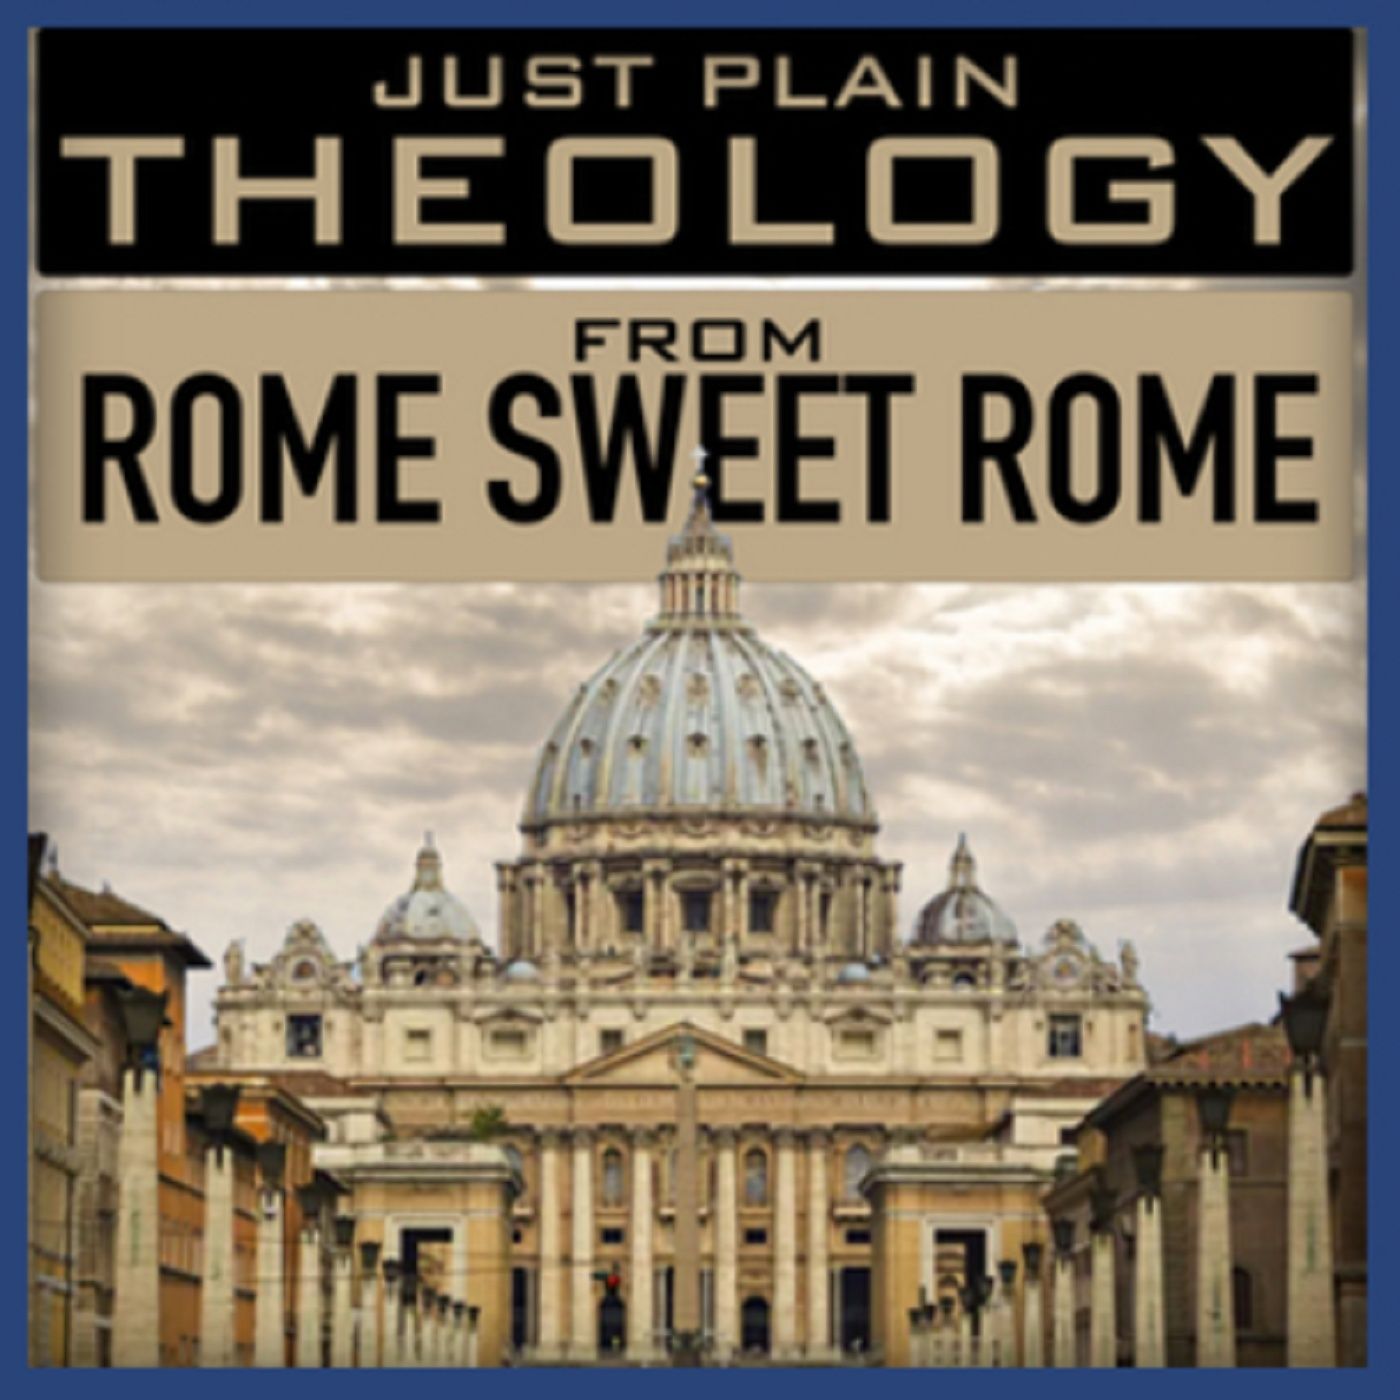 Episode 30: Just Plain Theology from Rome Sweet Rome (October 2, 2017)